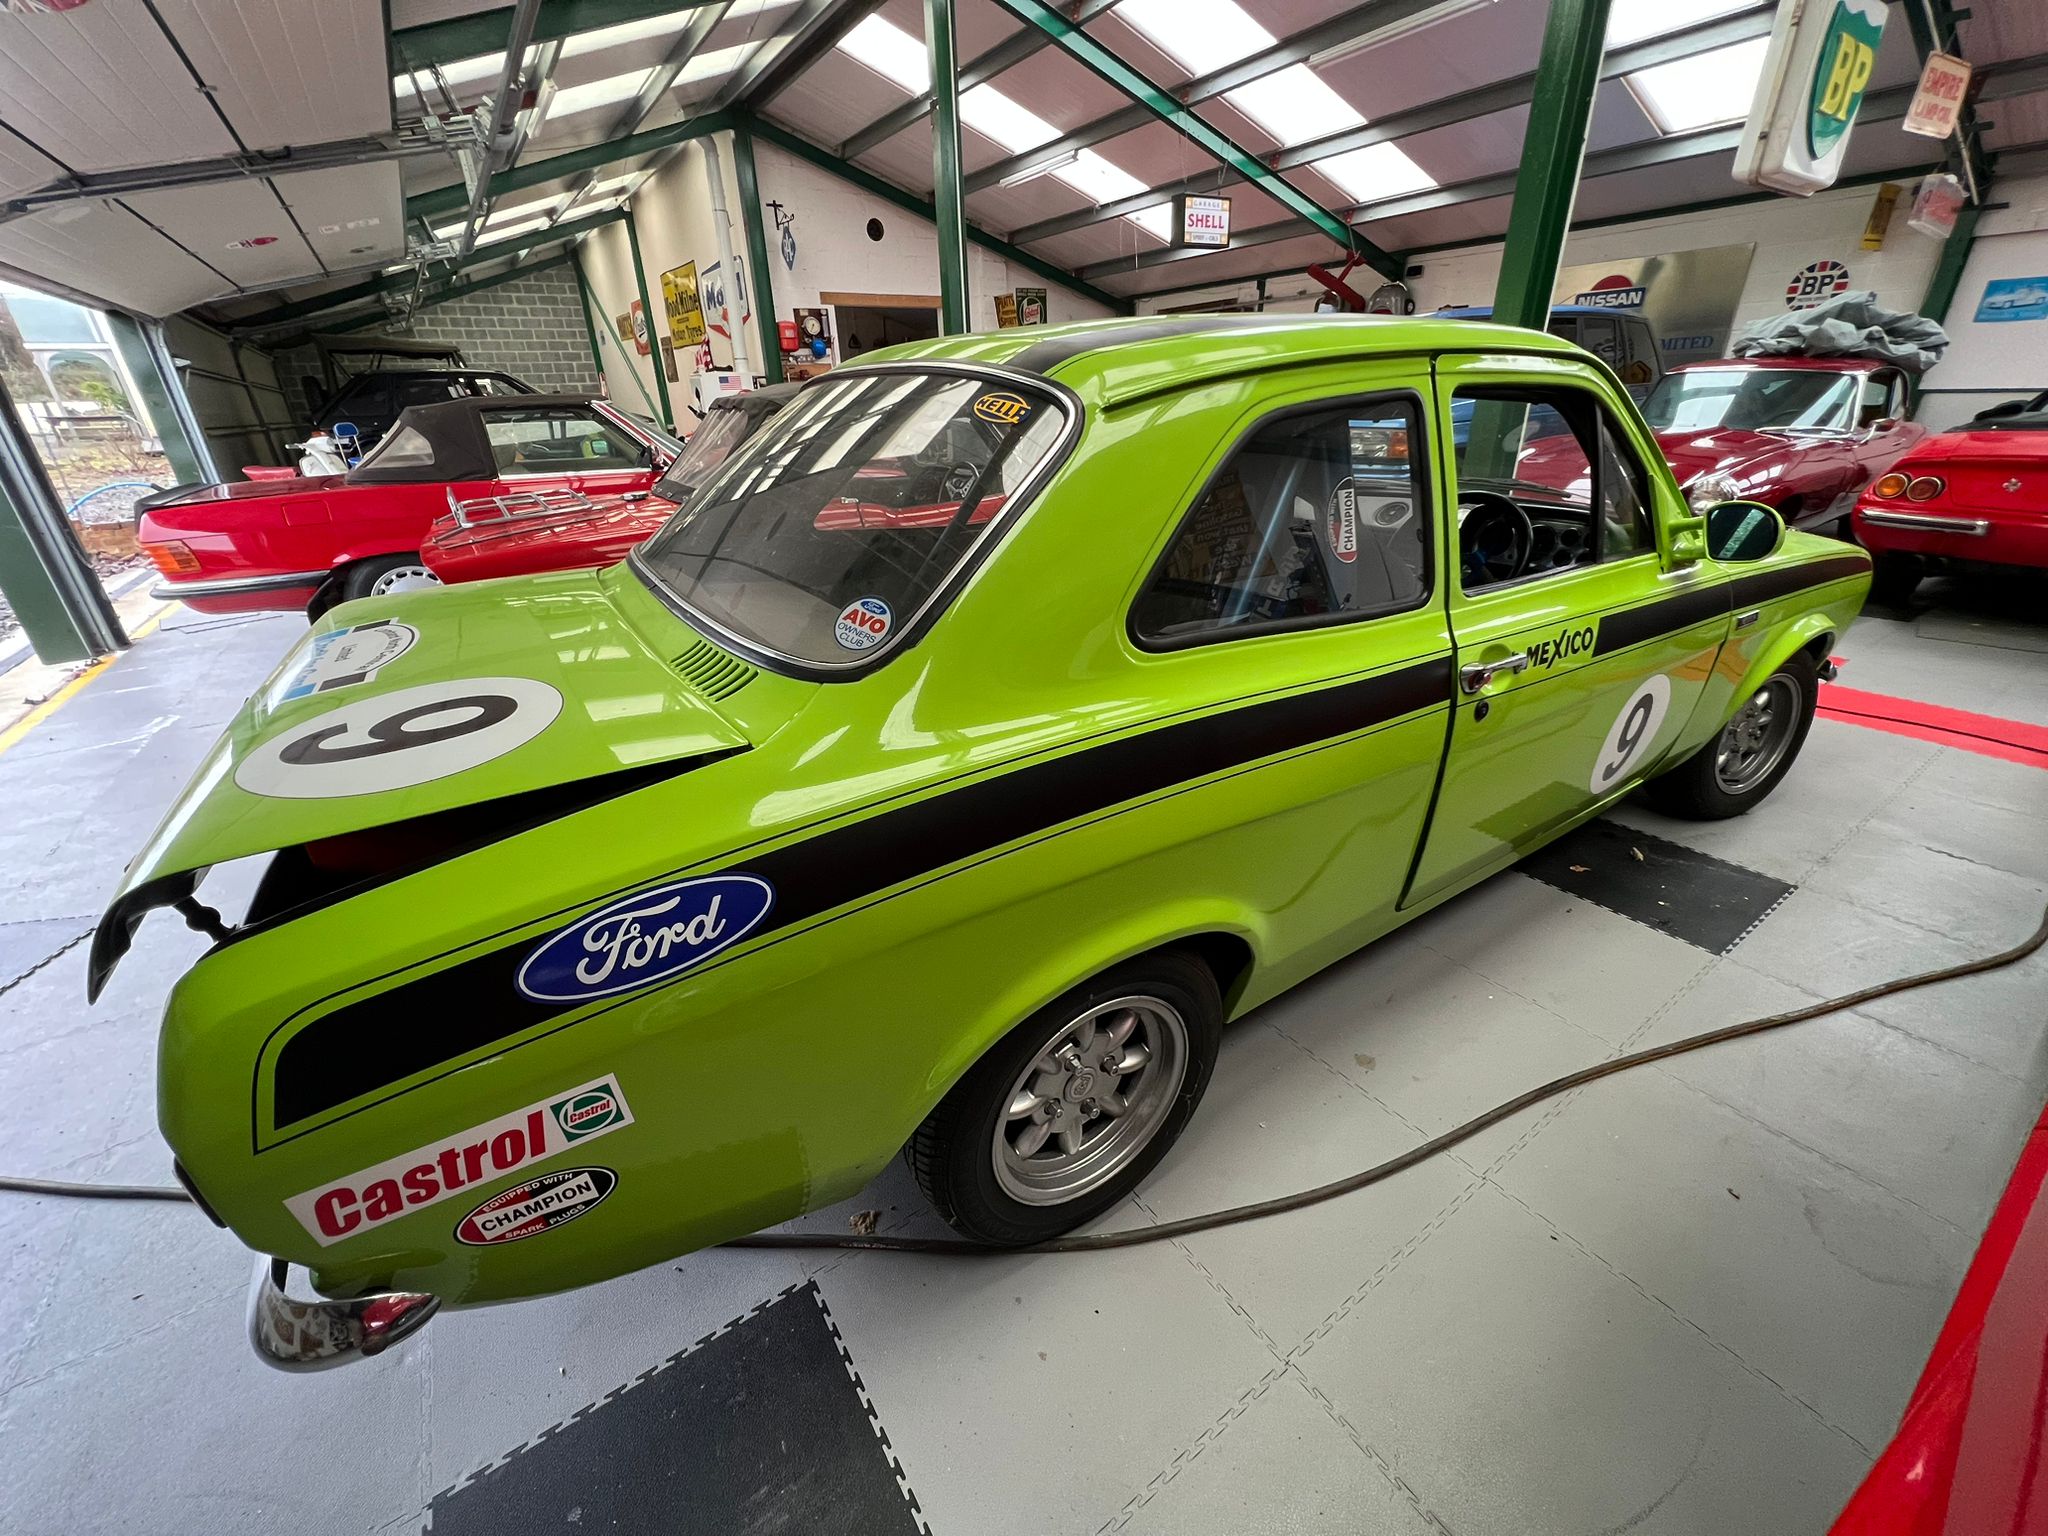 Ford Escort Mk1 X-Sport Mexico Competition Car 1973 - Image 16 of 18